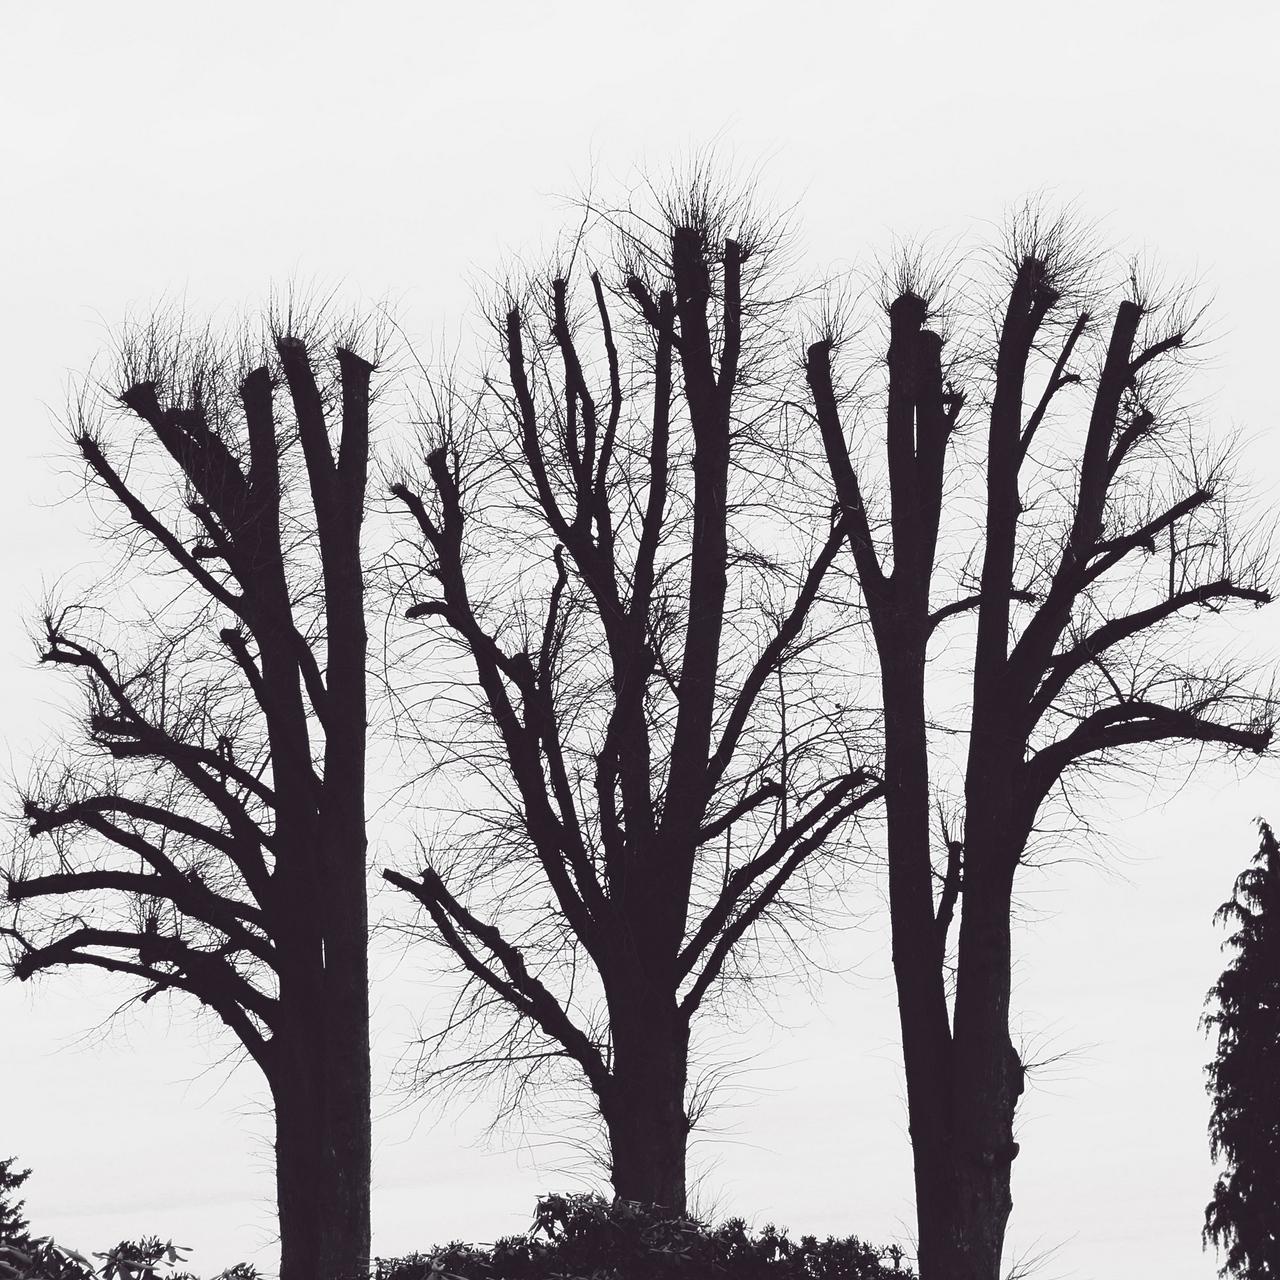 Download wallpaper 1280x1280 trees, branches, aesthetic, bw ipad